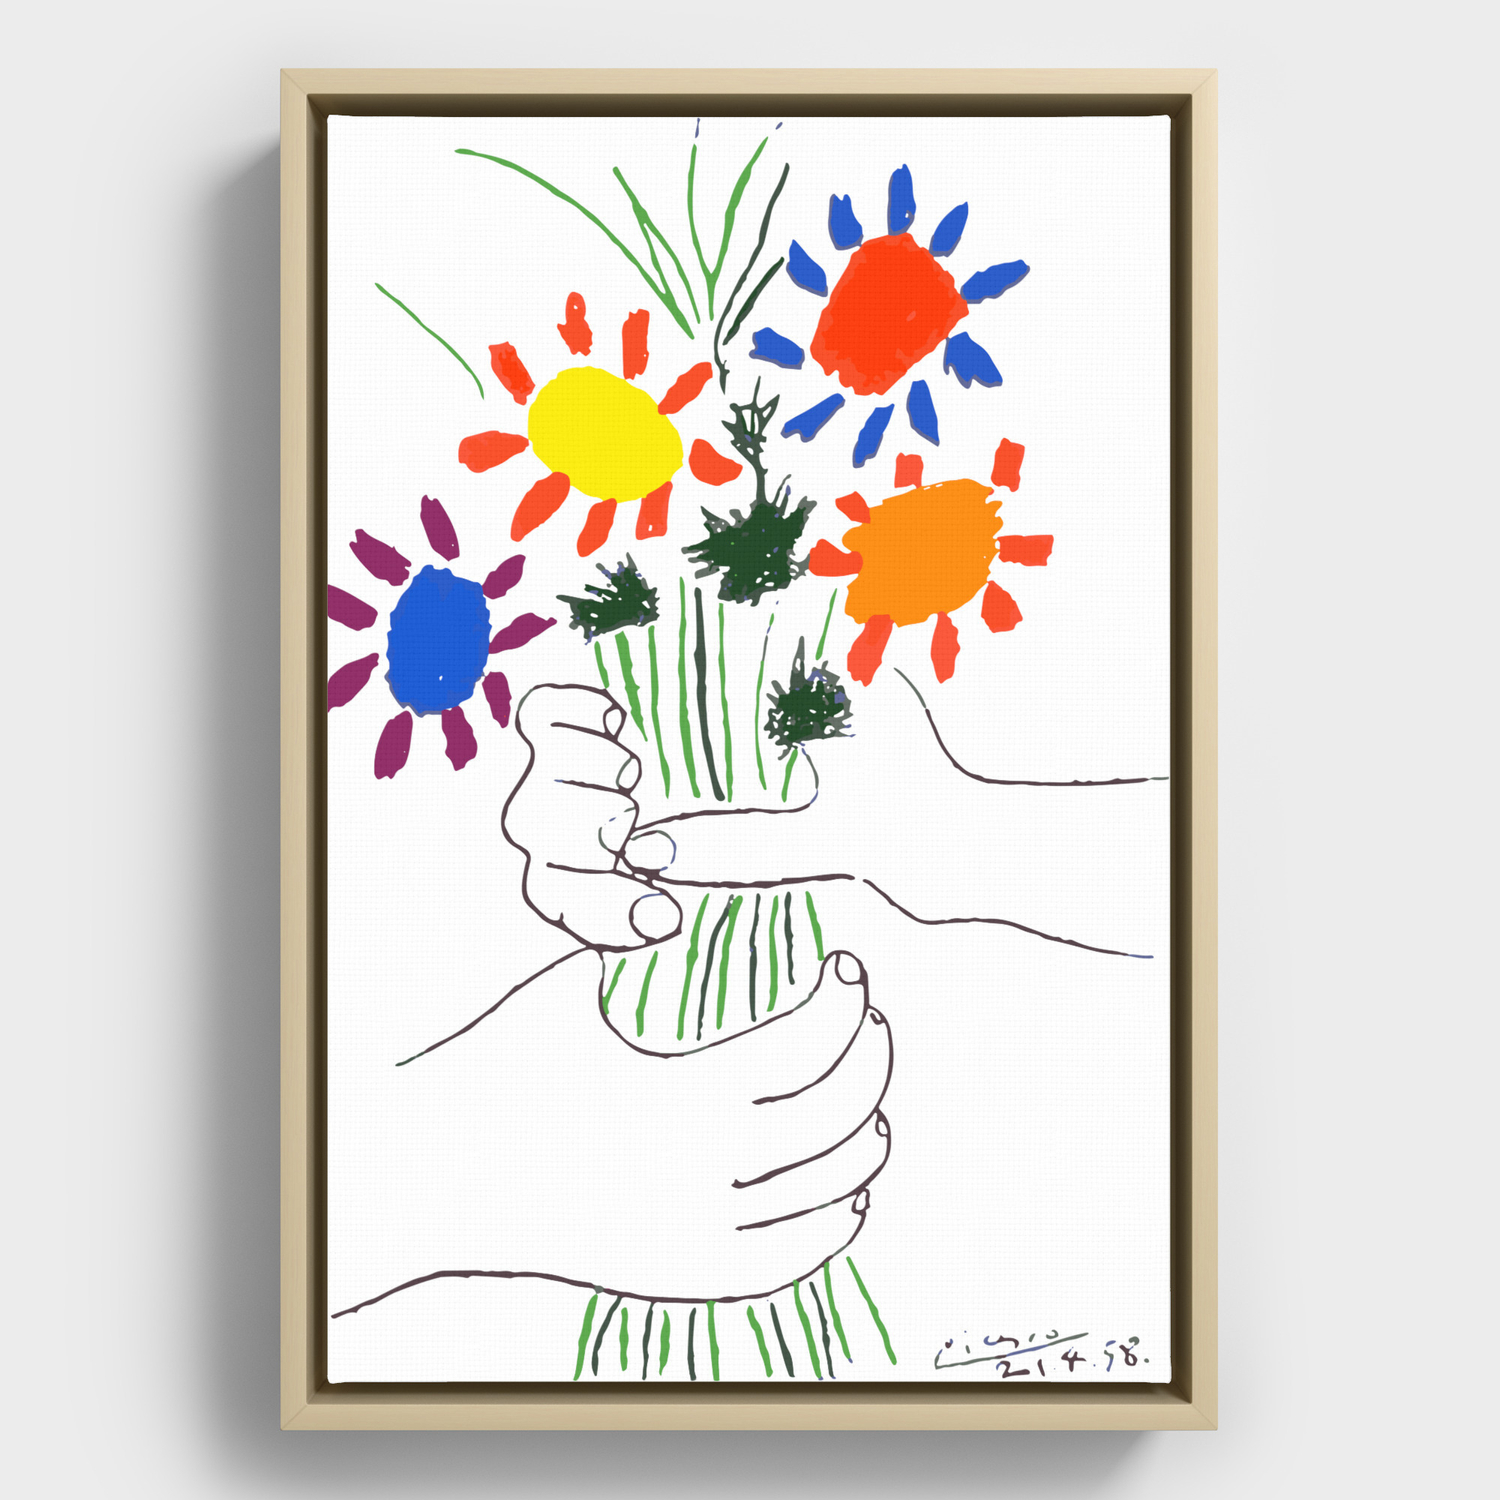 Pablo Picasso Bouquet Of Peace 1958 (Flowers Bouquet With Hands), T Shirt,  Artwork Framed Canvas